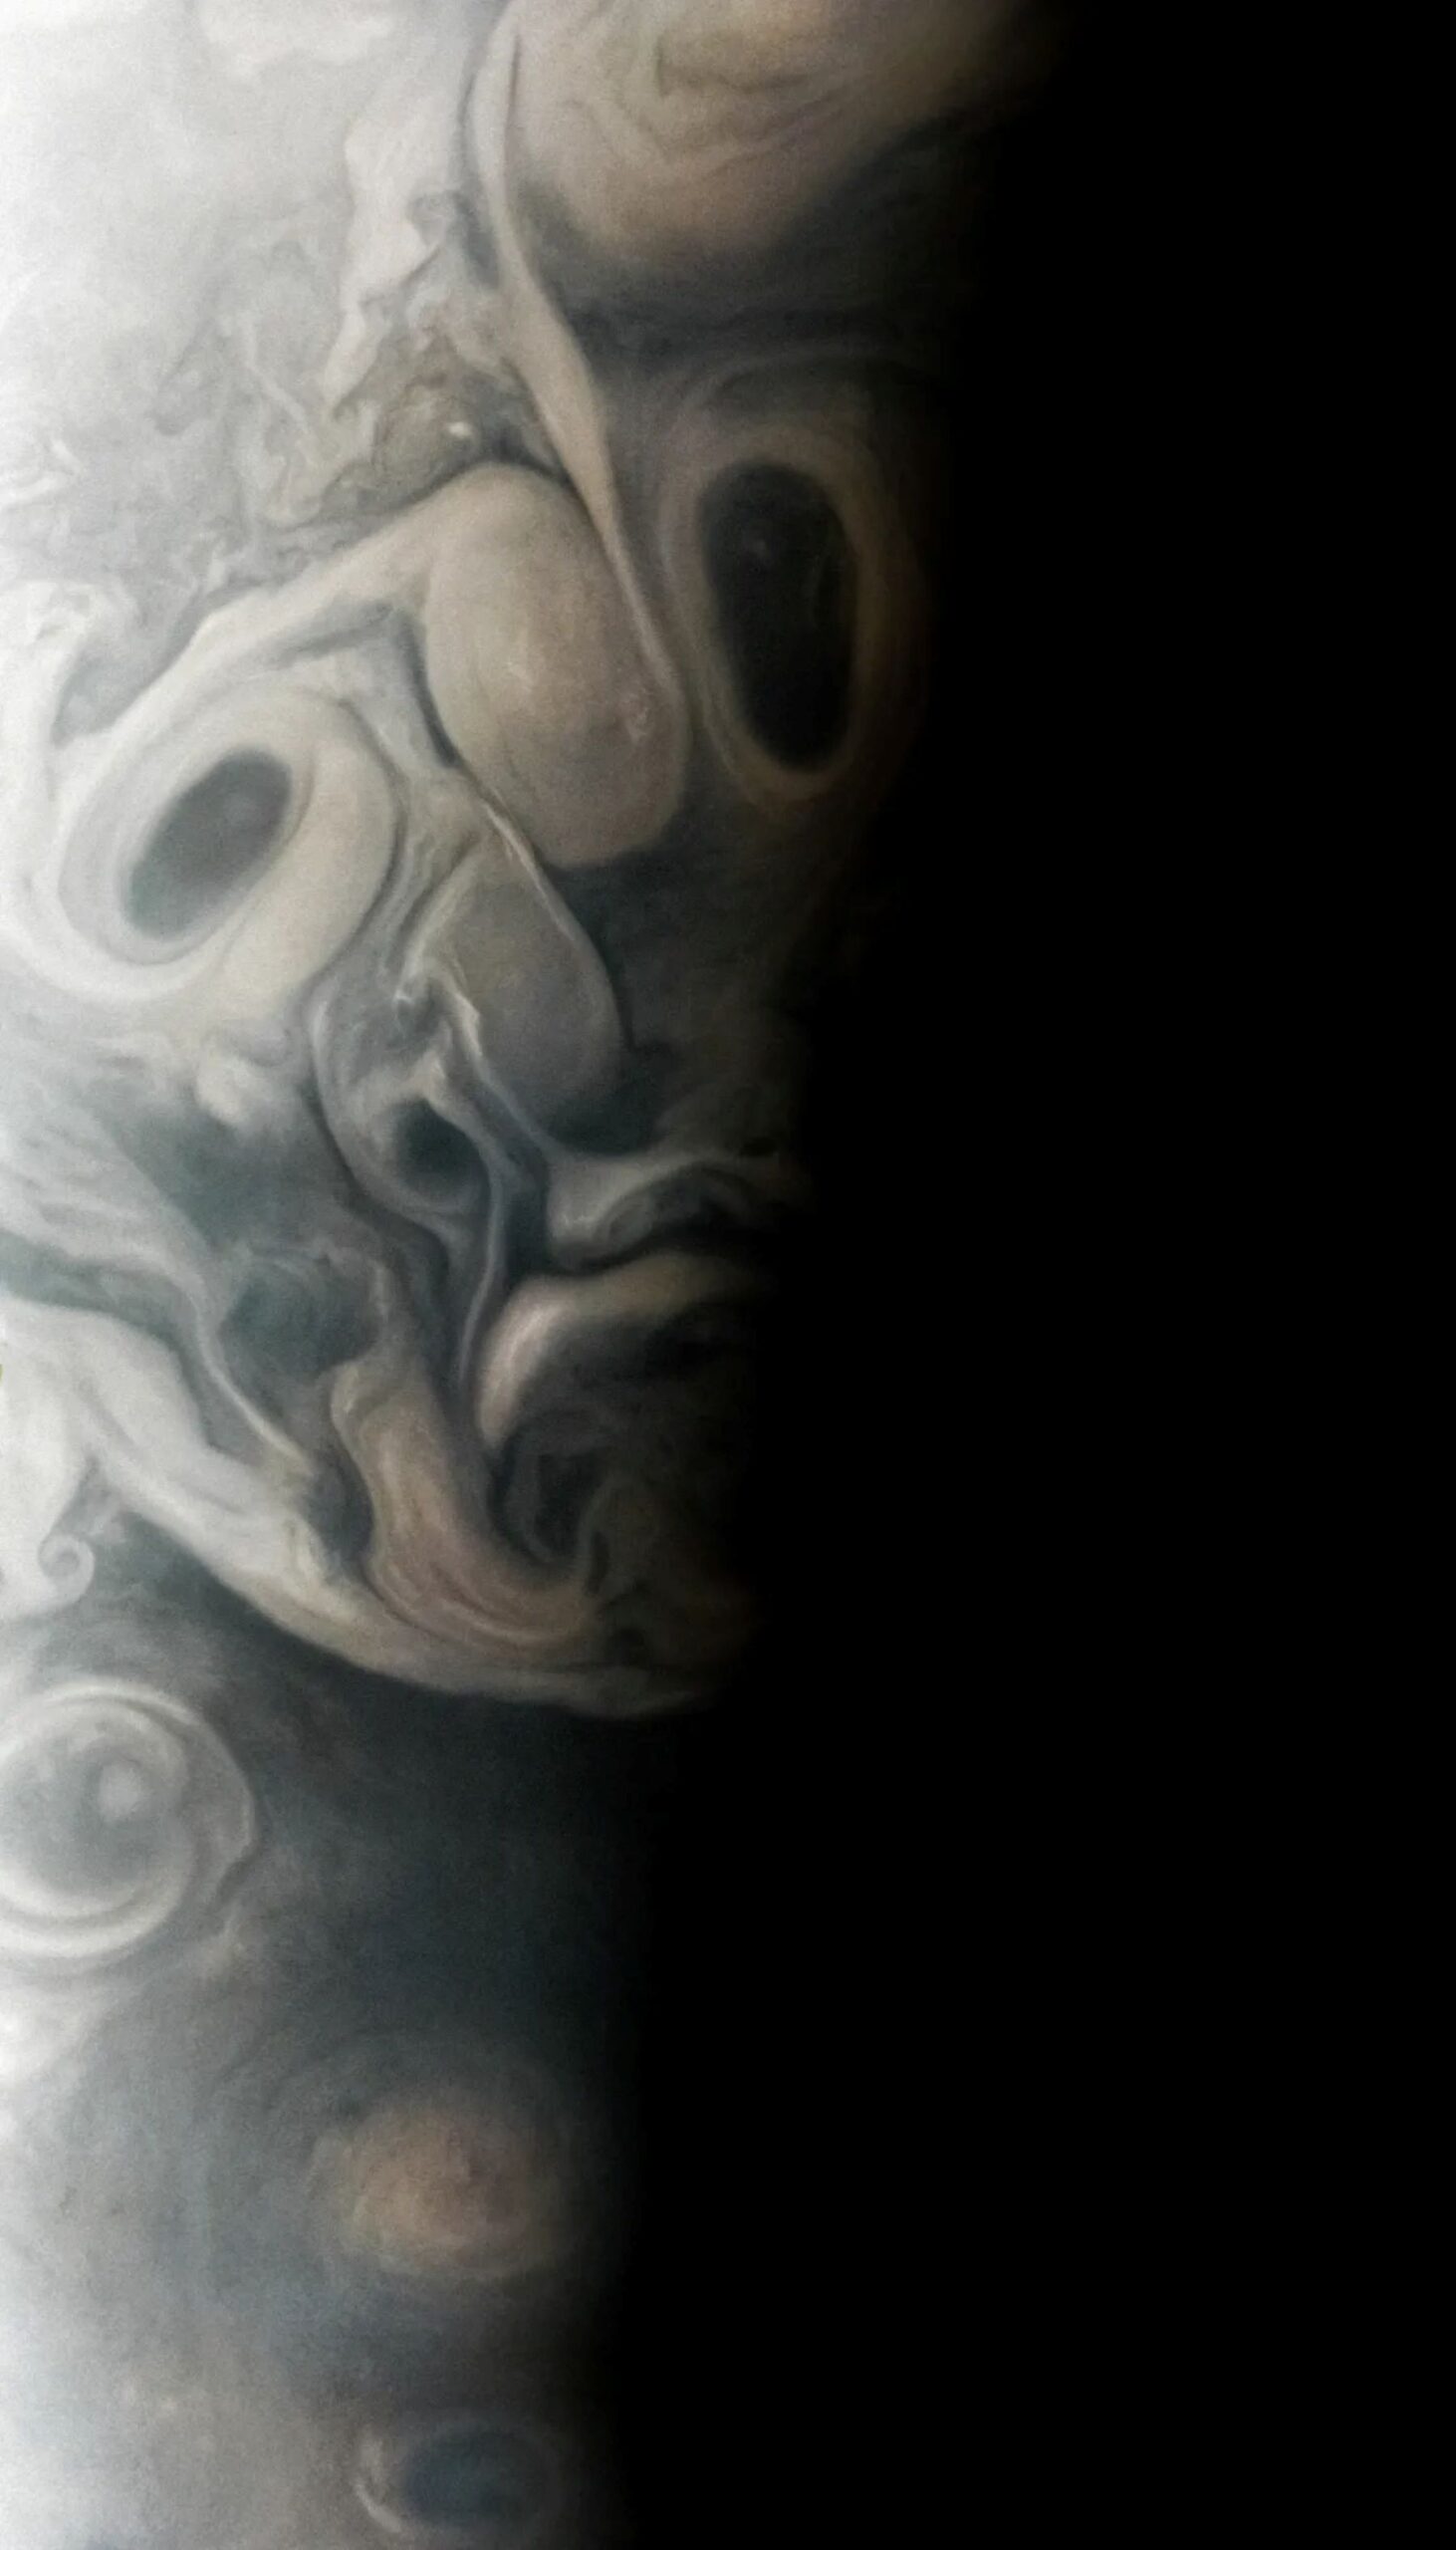 Just in Time for Halloween, NASA’s Juno Mission Spots Eerie “Face” on Jupiter